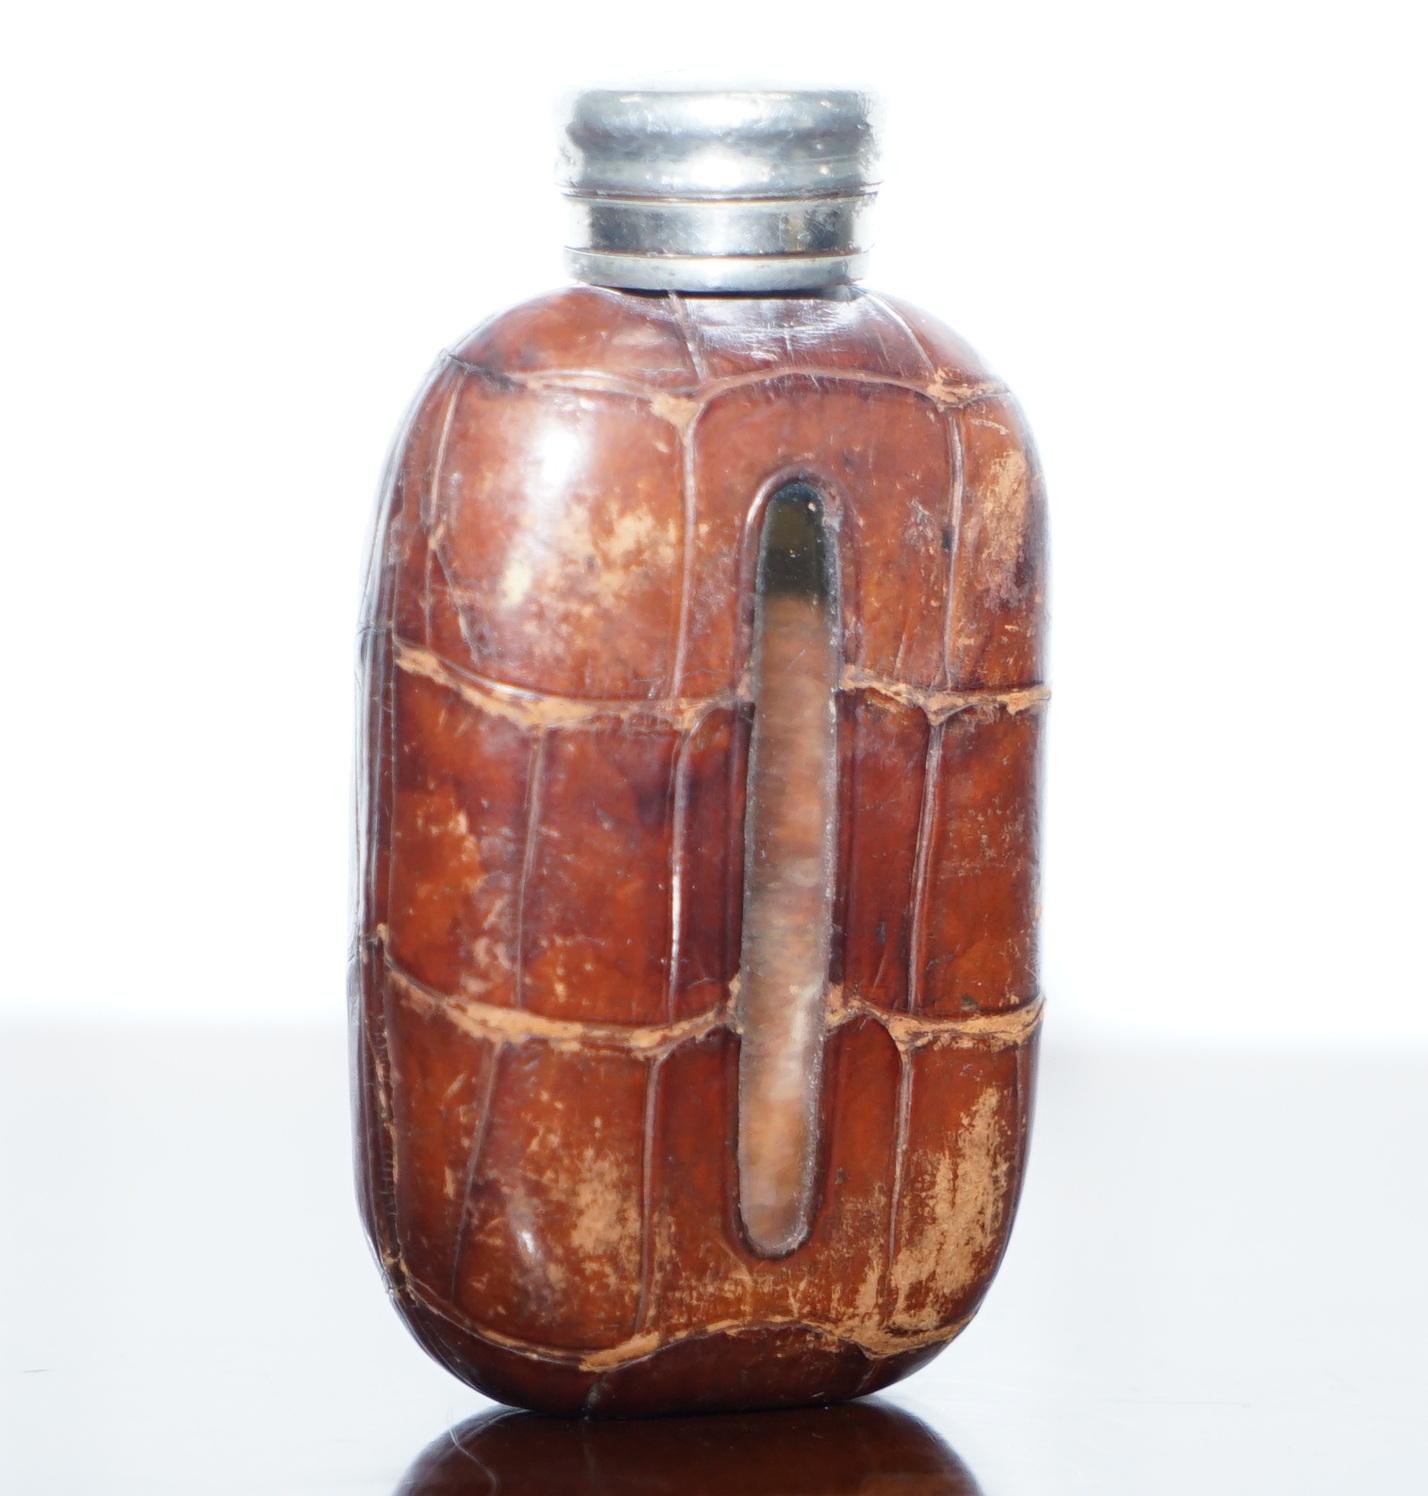 We are delighted to offer for sale this attractive small Alligator leather Victorian hip flask engraved Made In England

A stunning little find, very elegant and super rare to find with the Alligator leather, the middle section is cut-out on both